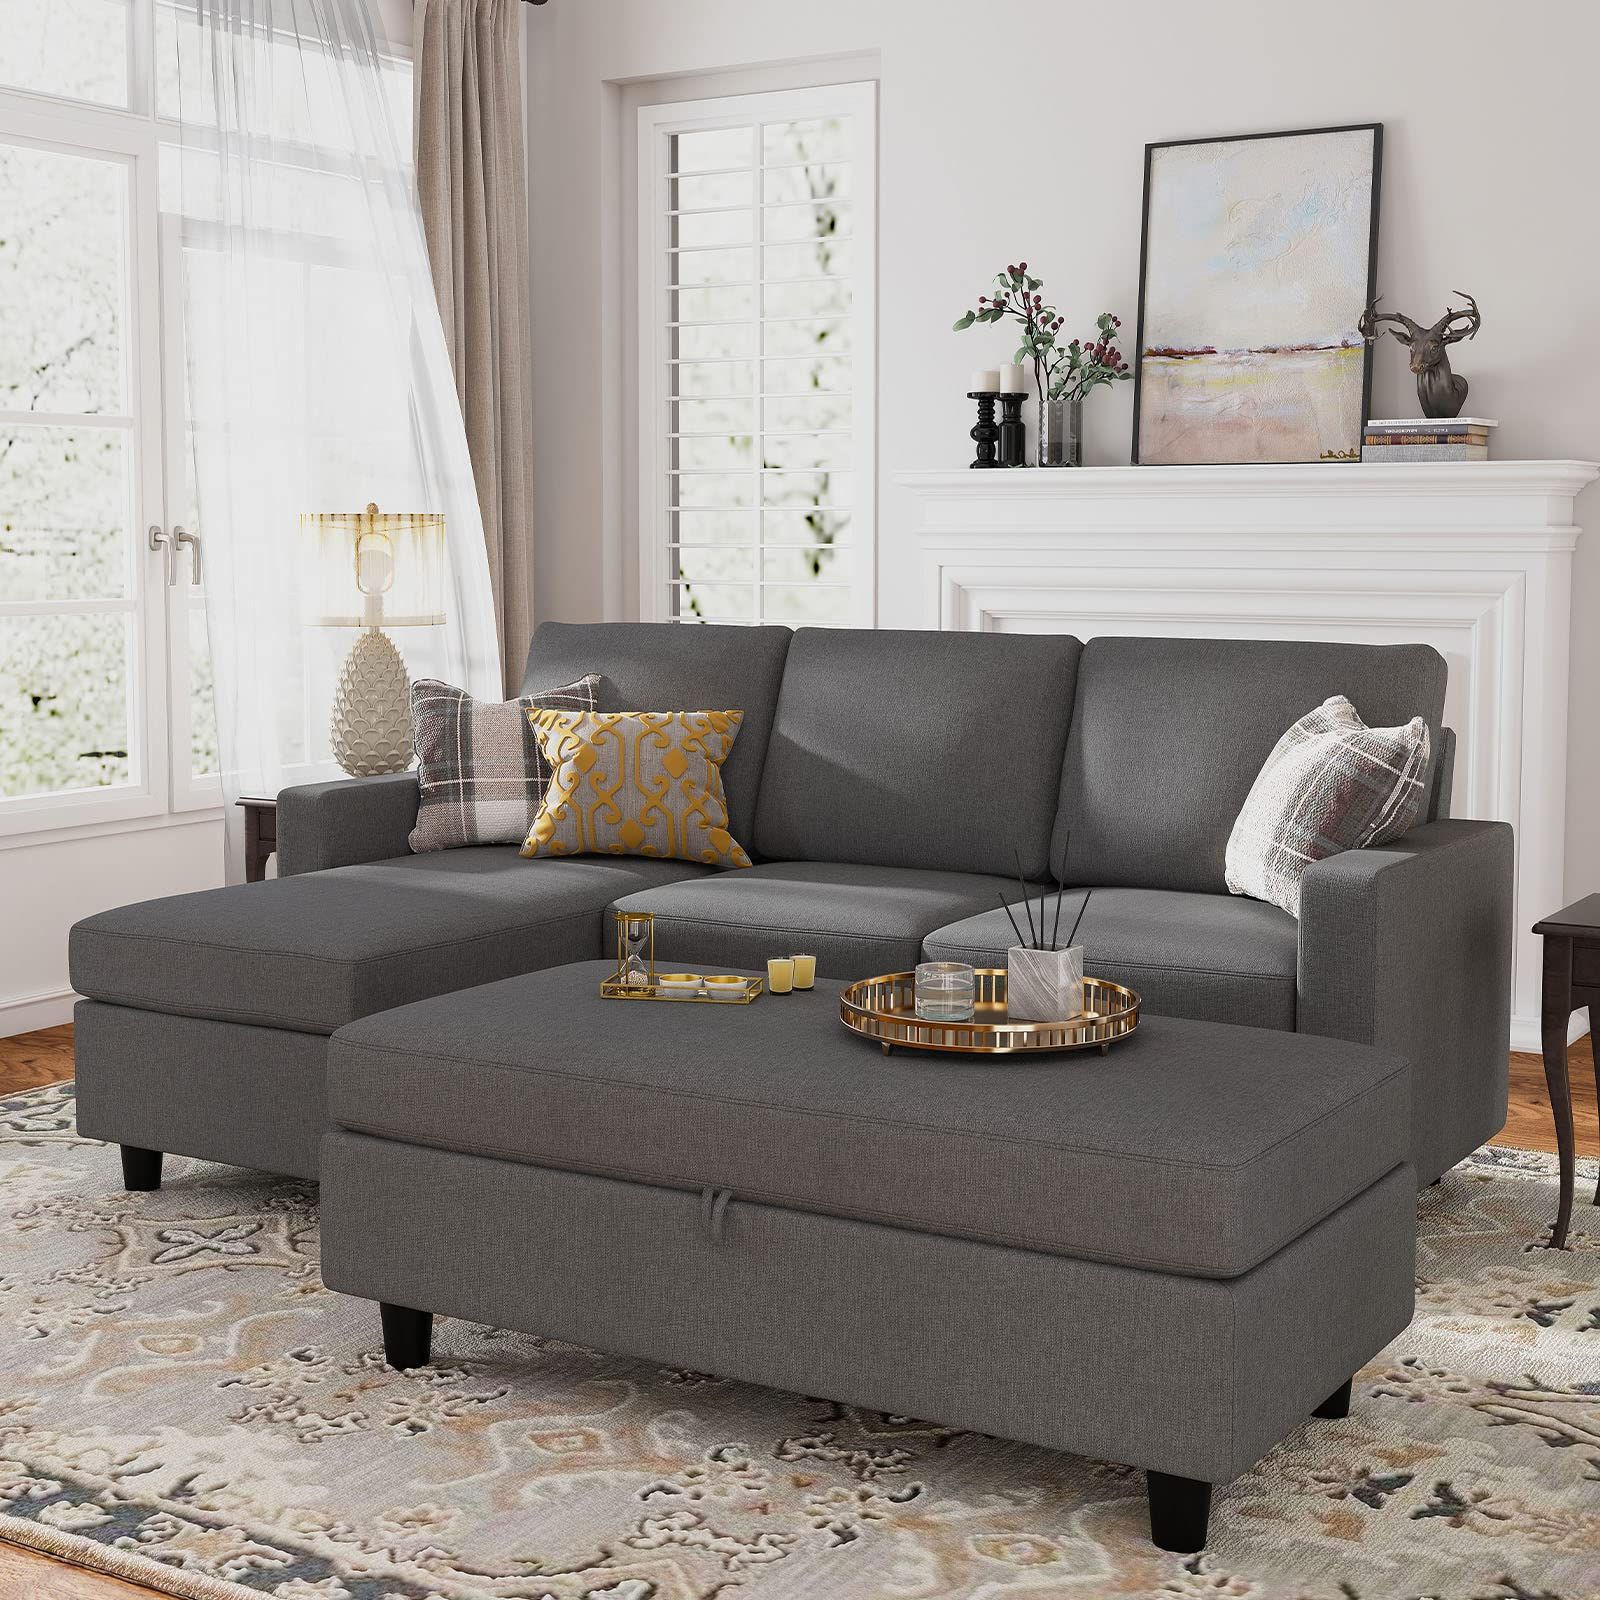 Favorite Honbay Reversible Sectional Couch With Ottoman L Shaped Sofa For Small Within Reversible Sectional Sofas (View 13 of 15)